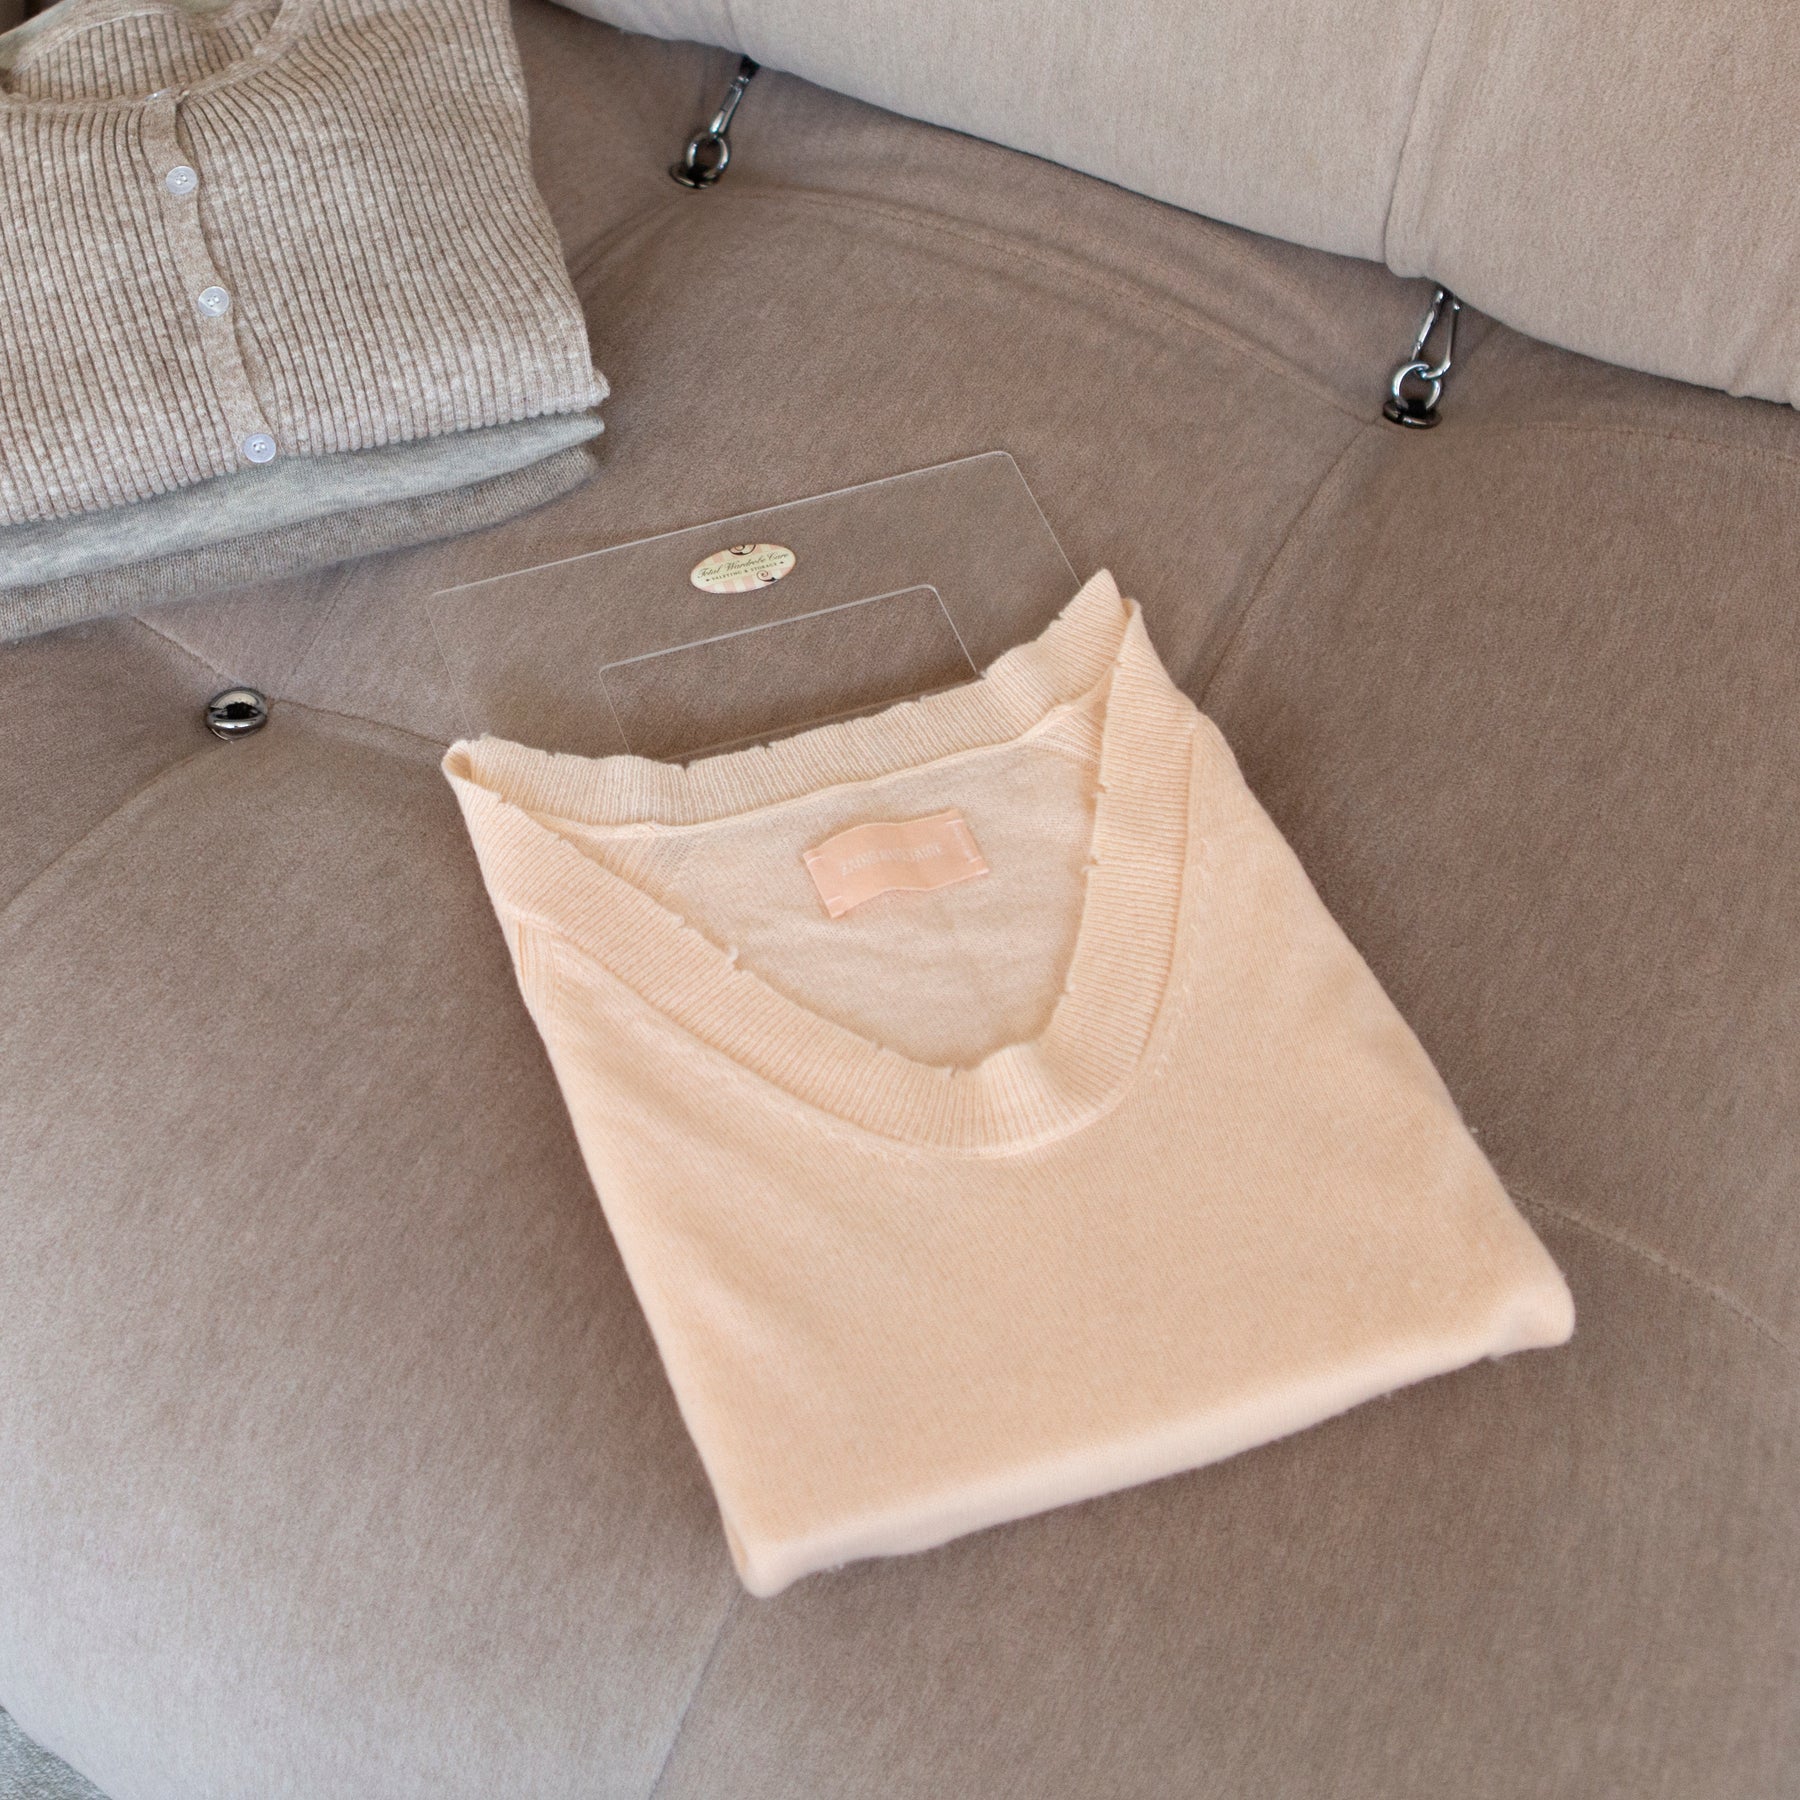 Folding palette with peach jumper resting on plush sofa